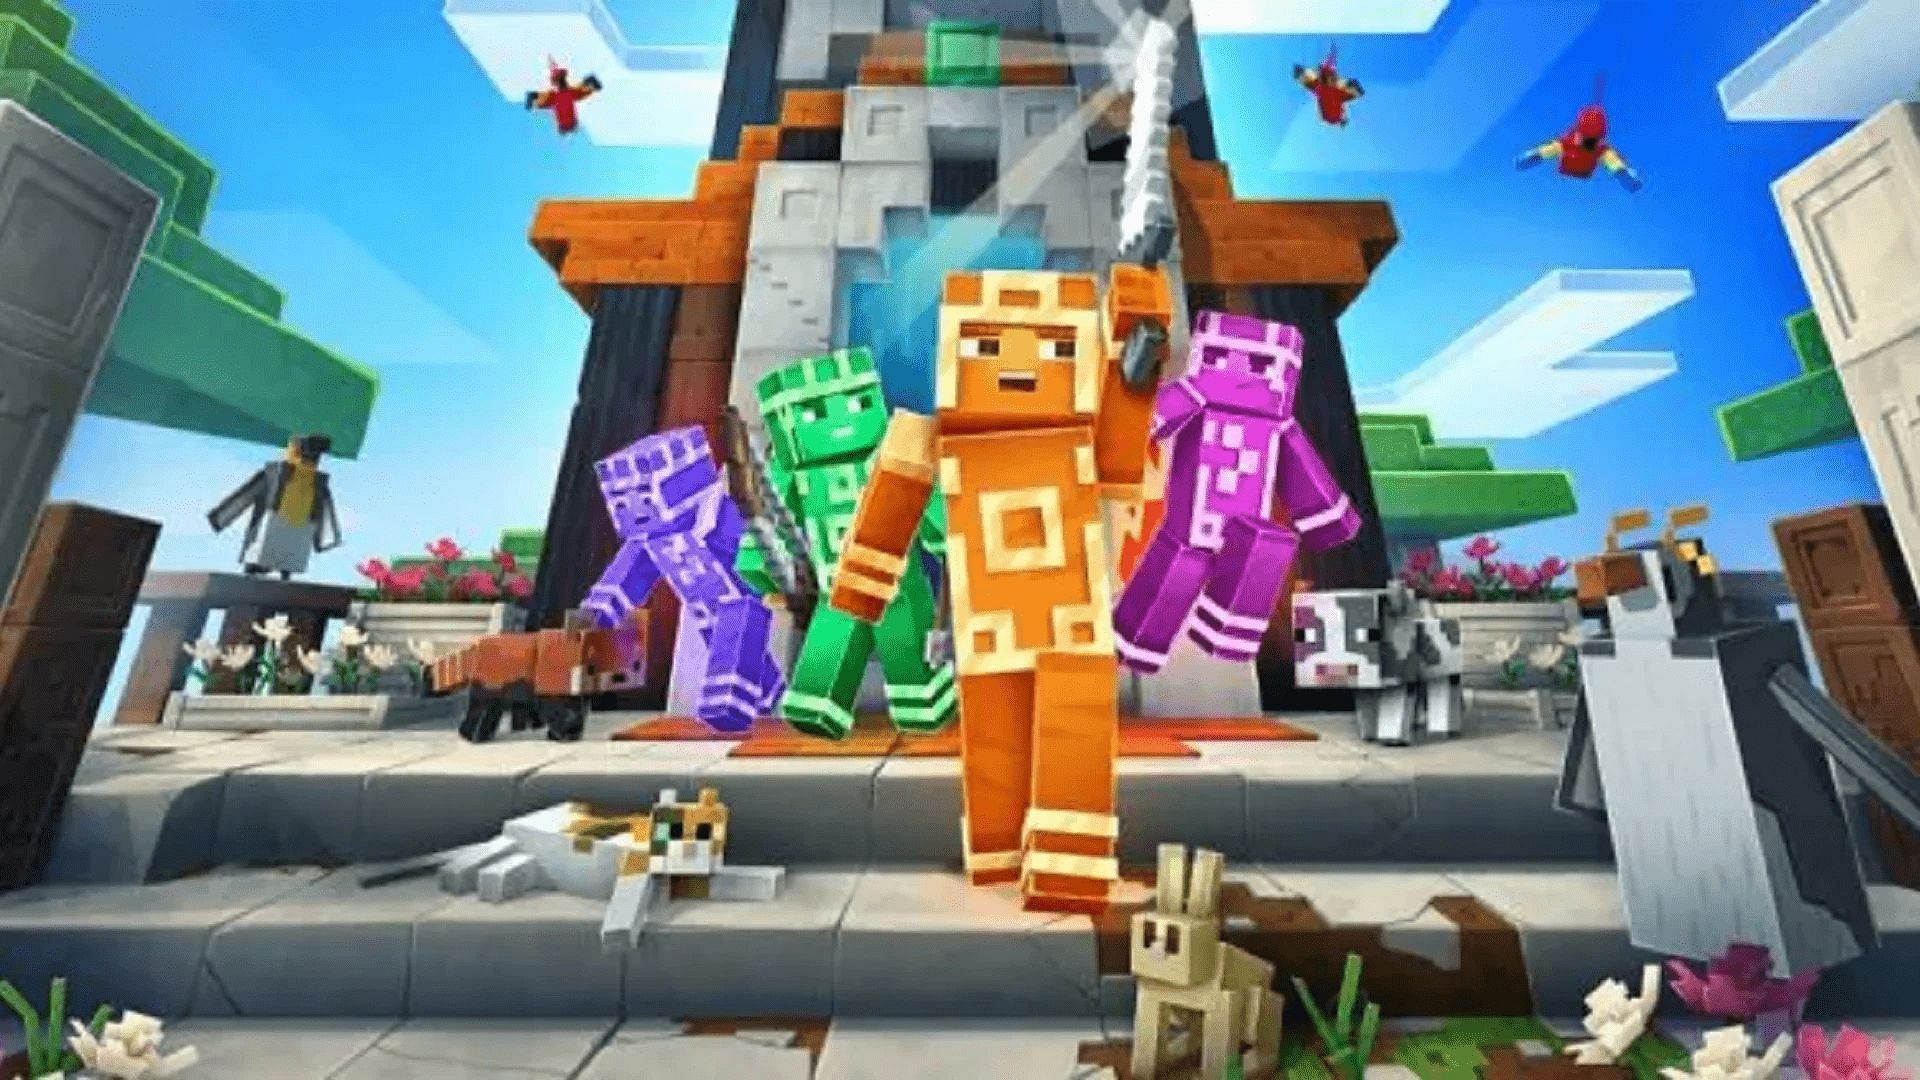 Minecraft Dungeons: All new features announced at Minecraft Live 2022